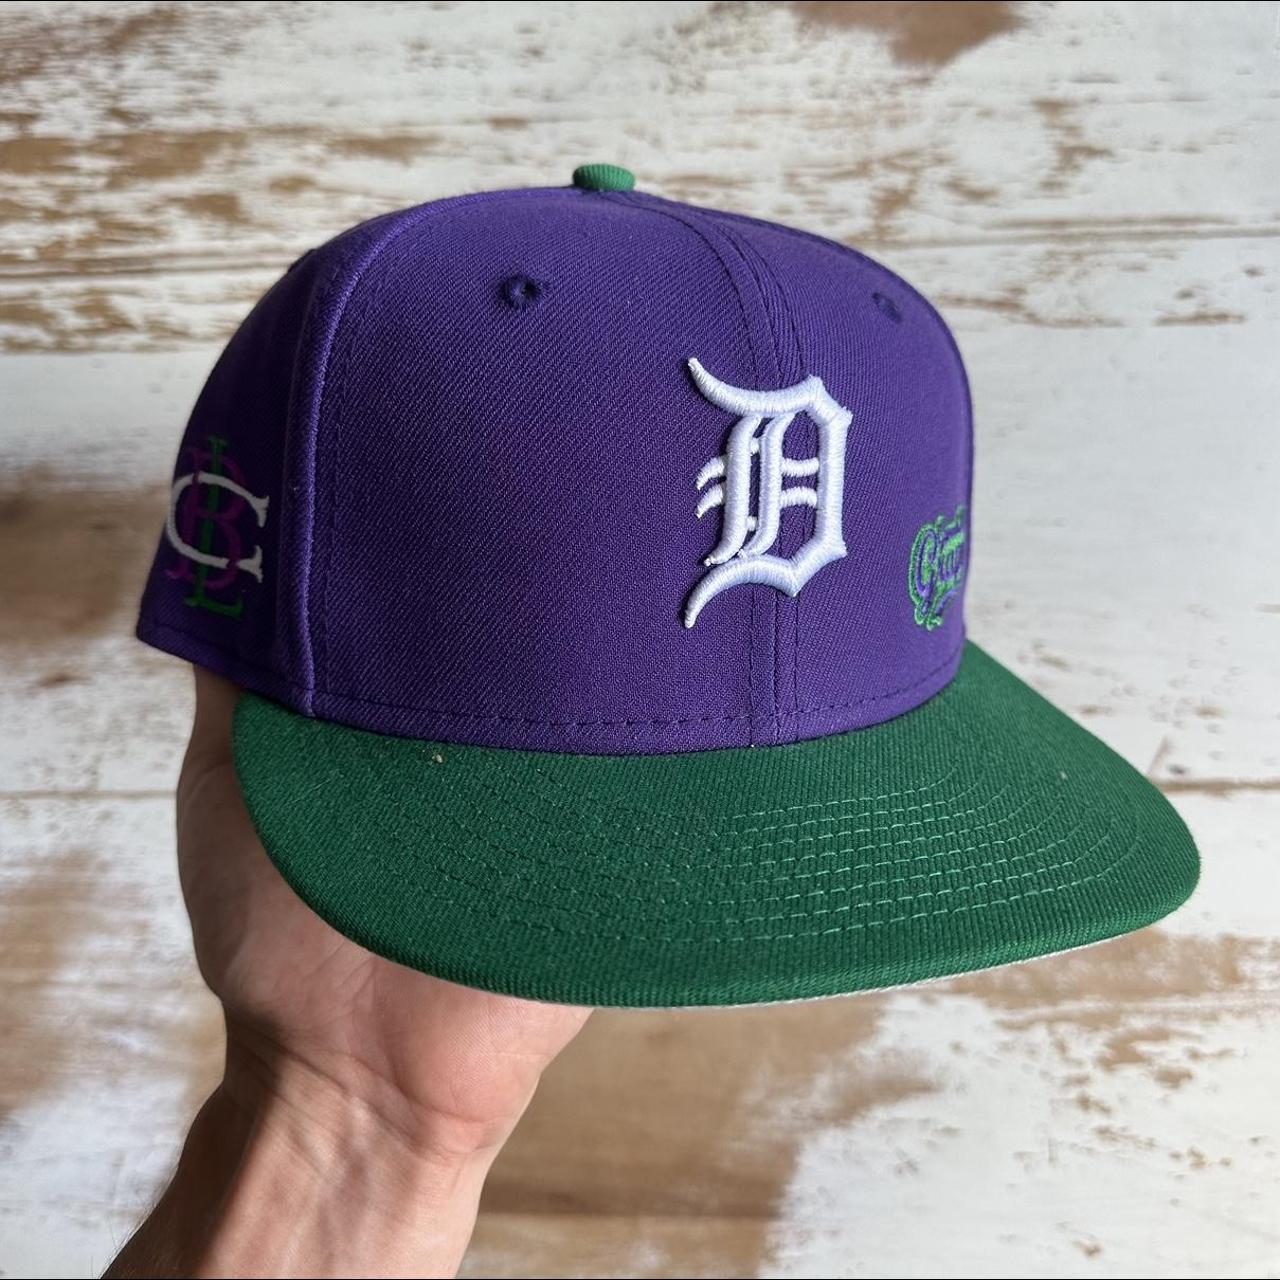 LIDS EXCLUSIVE PREVIEW! New Era Fitted Hats, Big League Chew